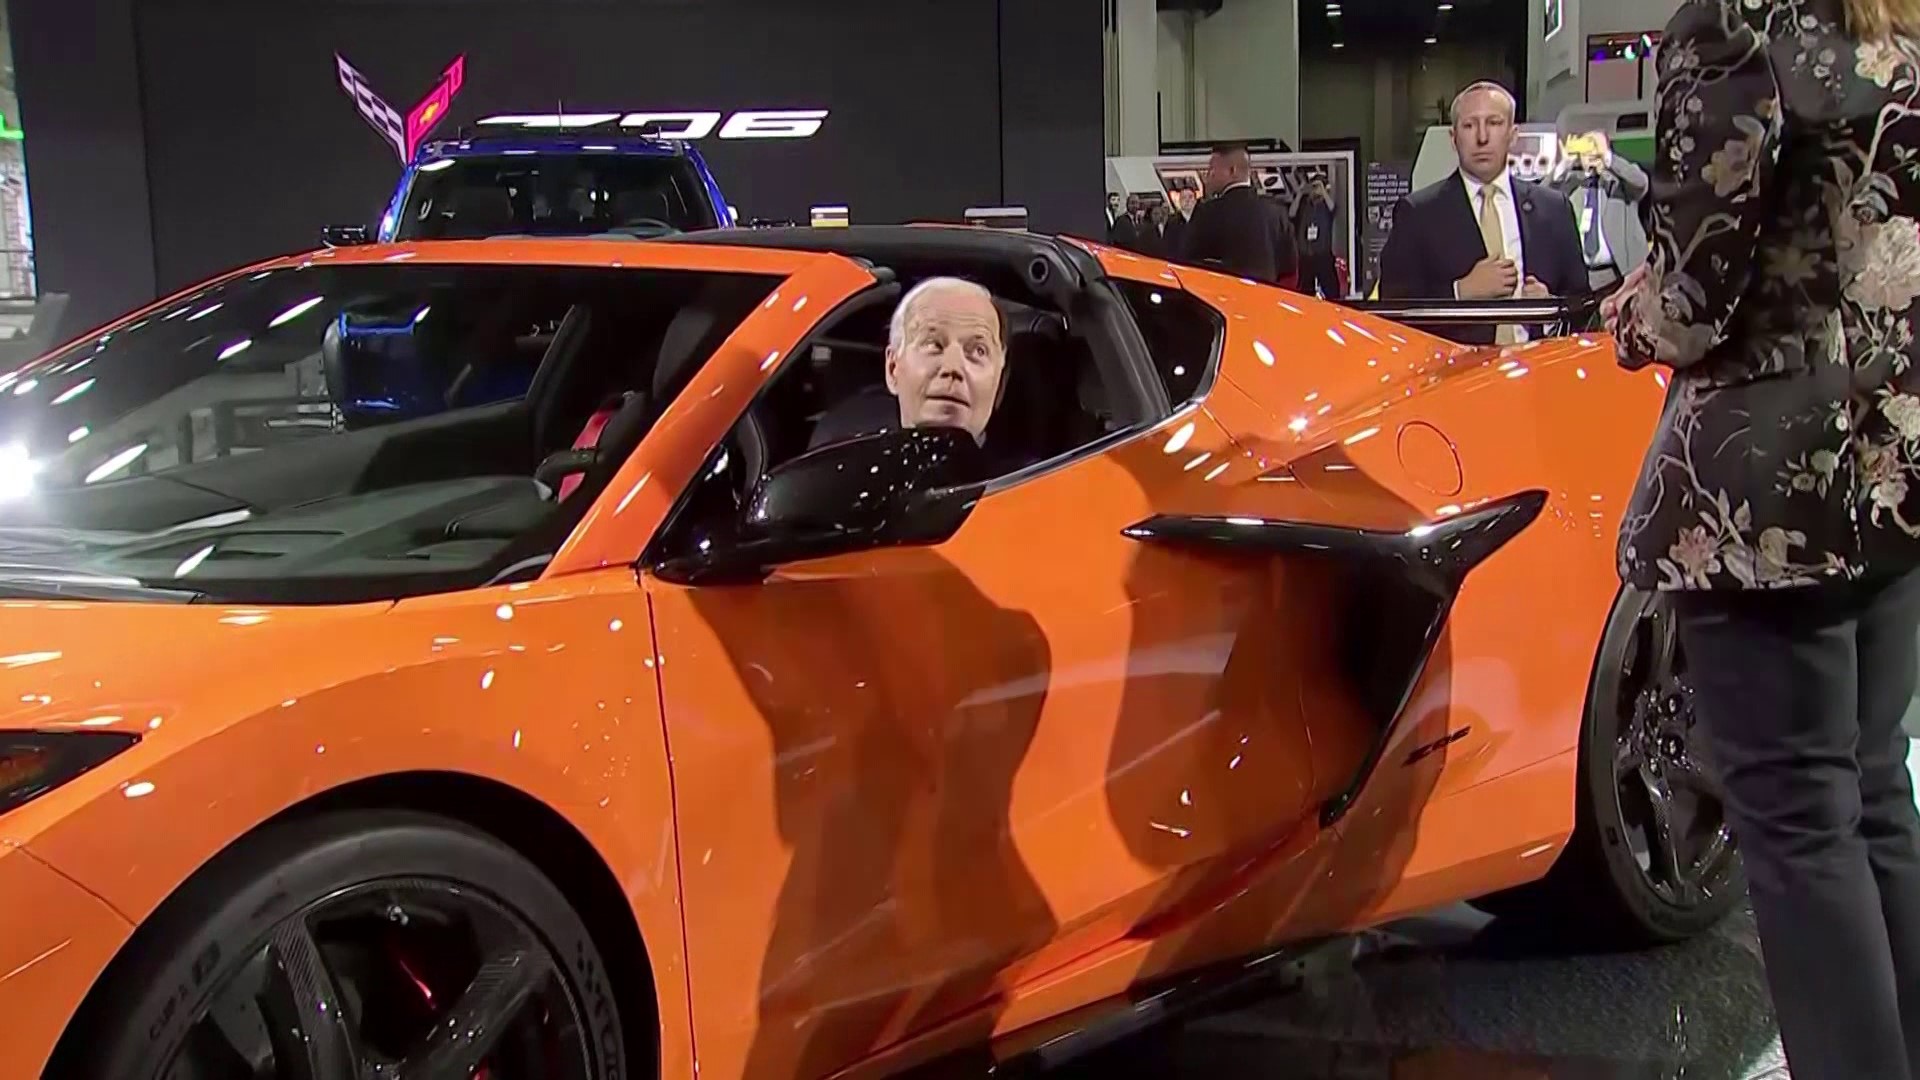 President Biden hit the road today at the North American International Auto Show in Detroit.